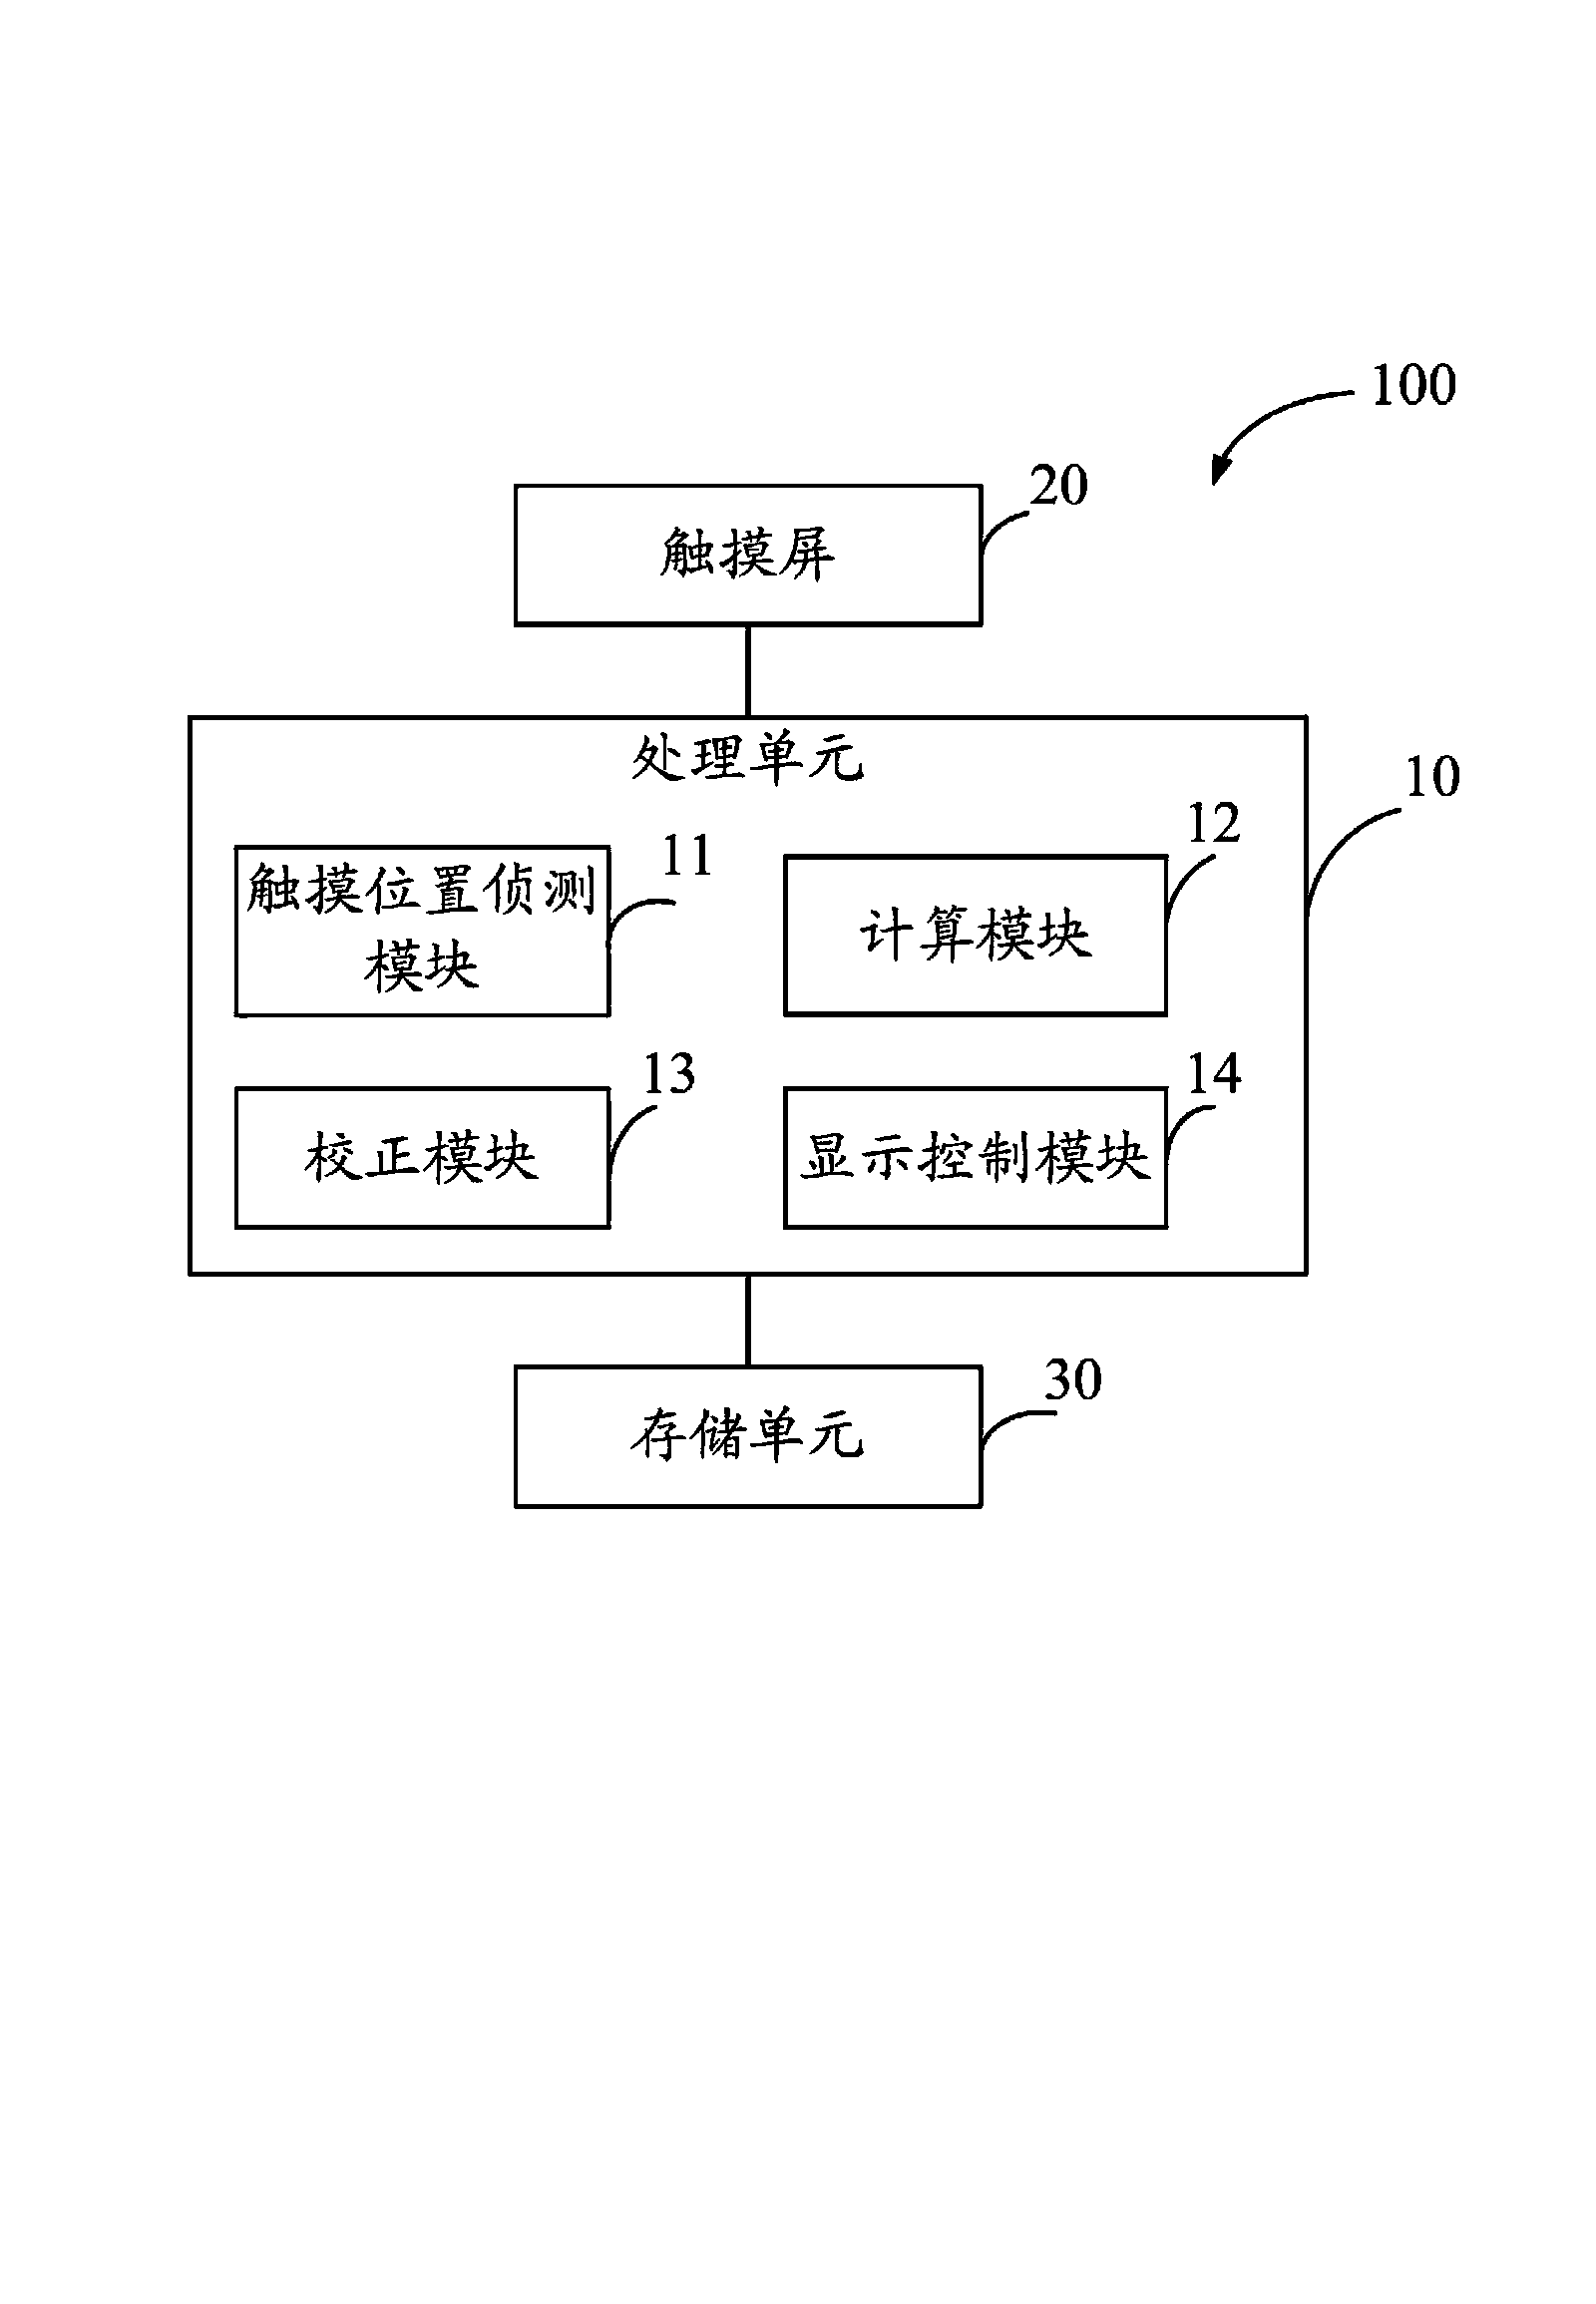 Electronic device, system and correcting method capable of automatically correcting touch position